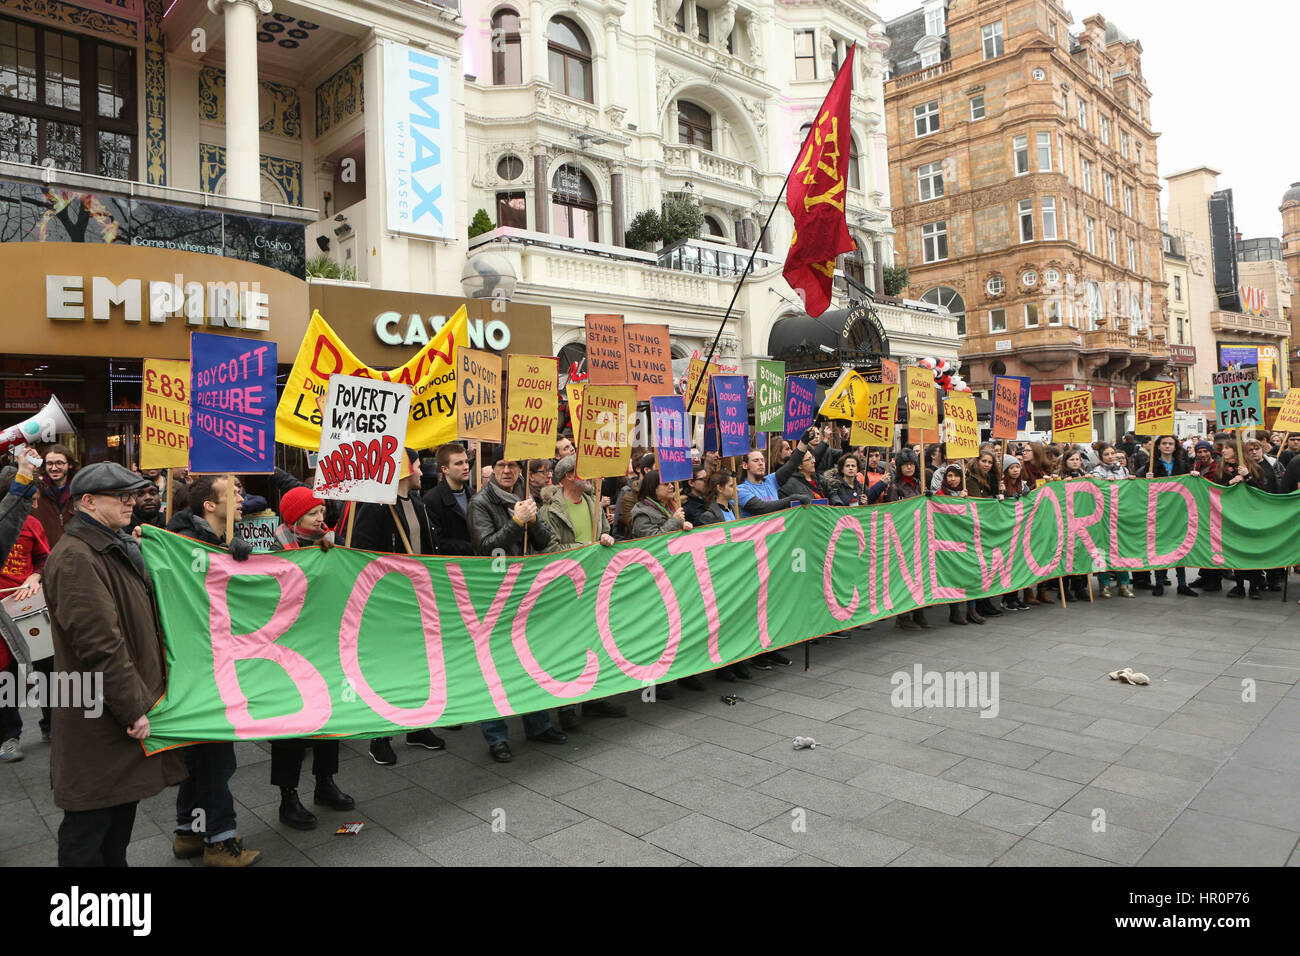 L ondon, UK. 25th Feb, 2017. Demo for living wage support the PictureHouse strike outside the Empire cinema Leiceste Square strikers holding a banner Credit: Brian Southam/Alamy Live News Stock Photo